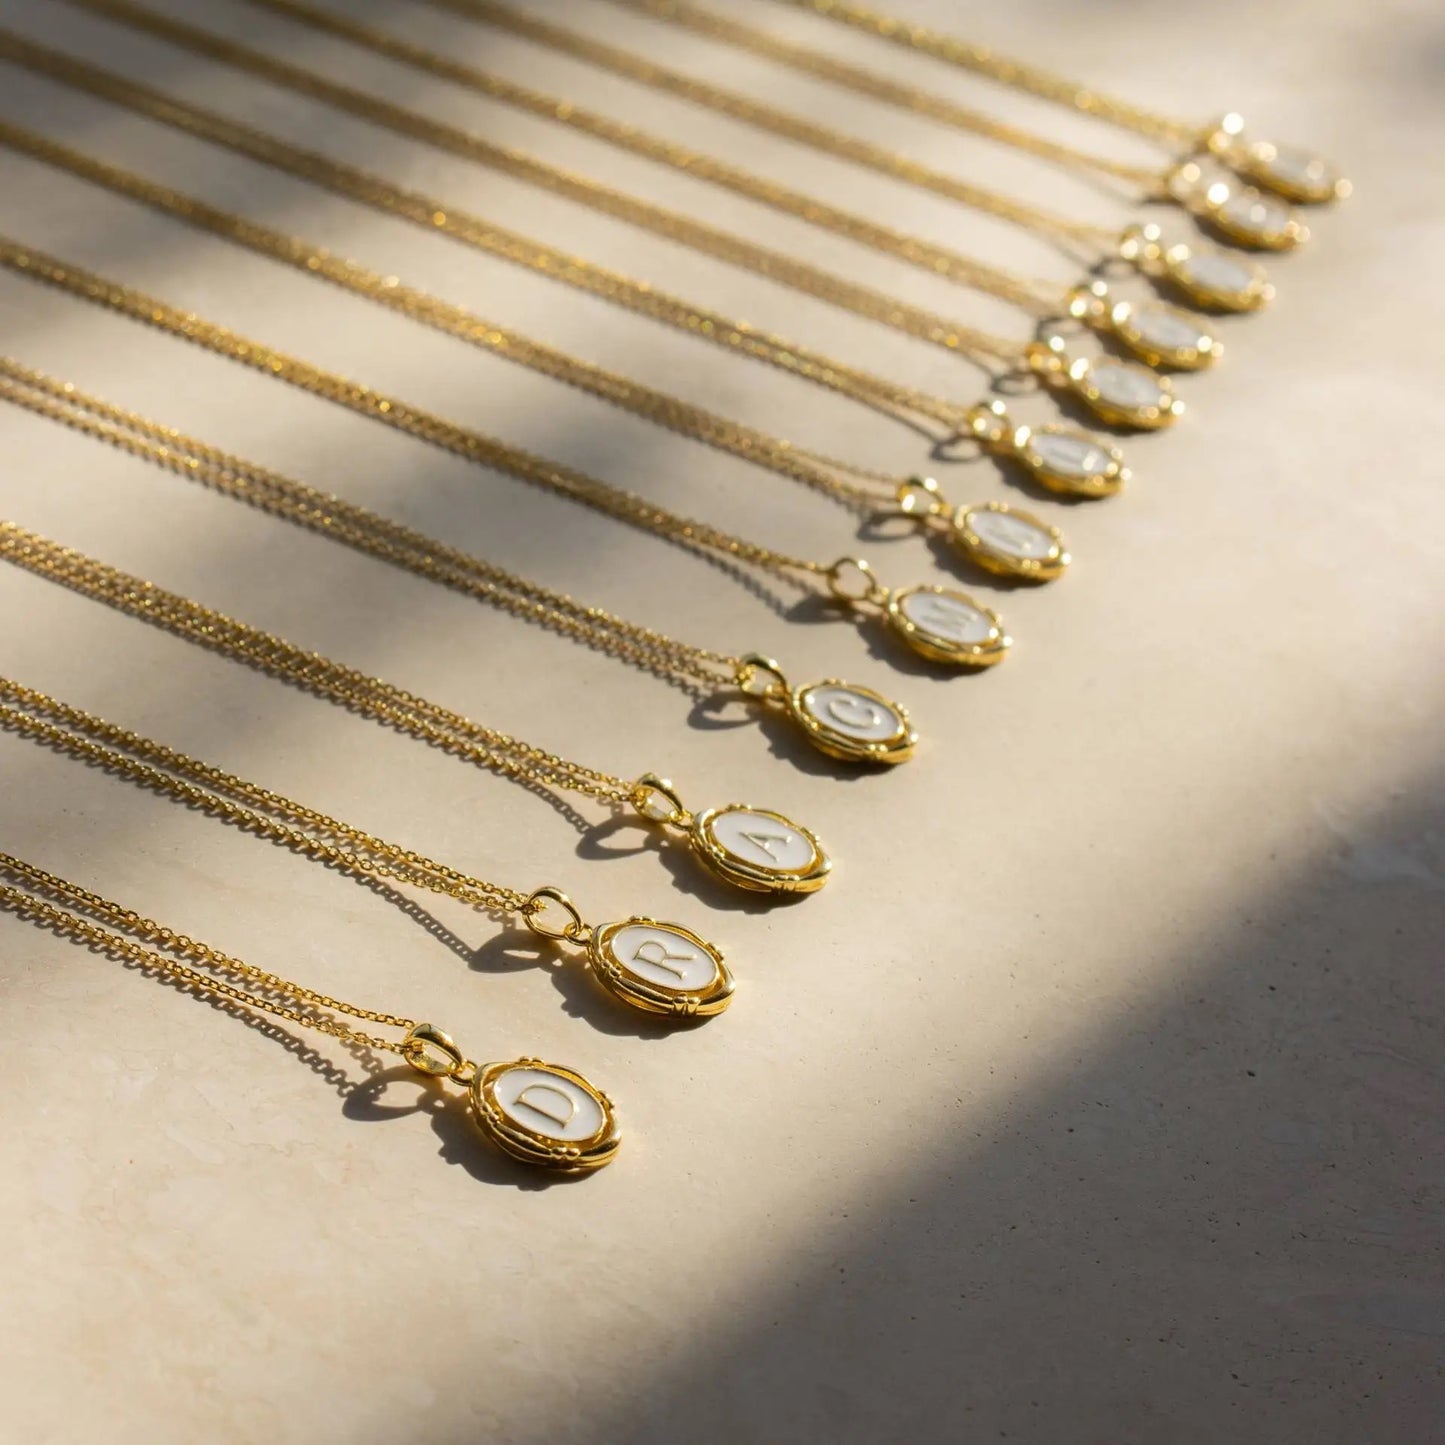 Initial necklace | gold plated necklace